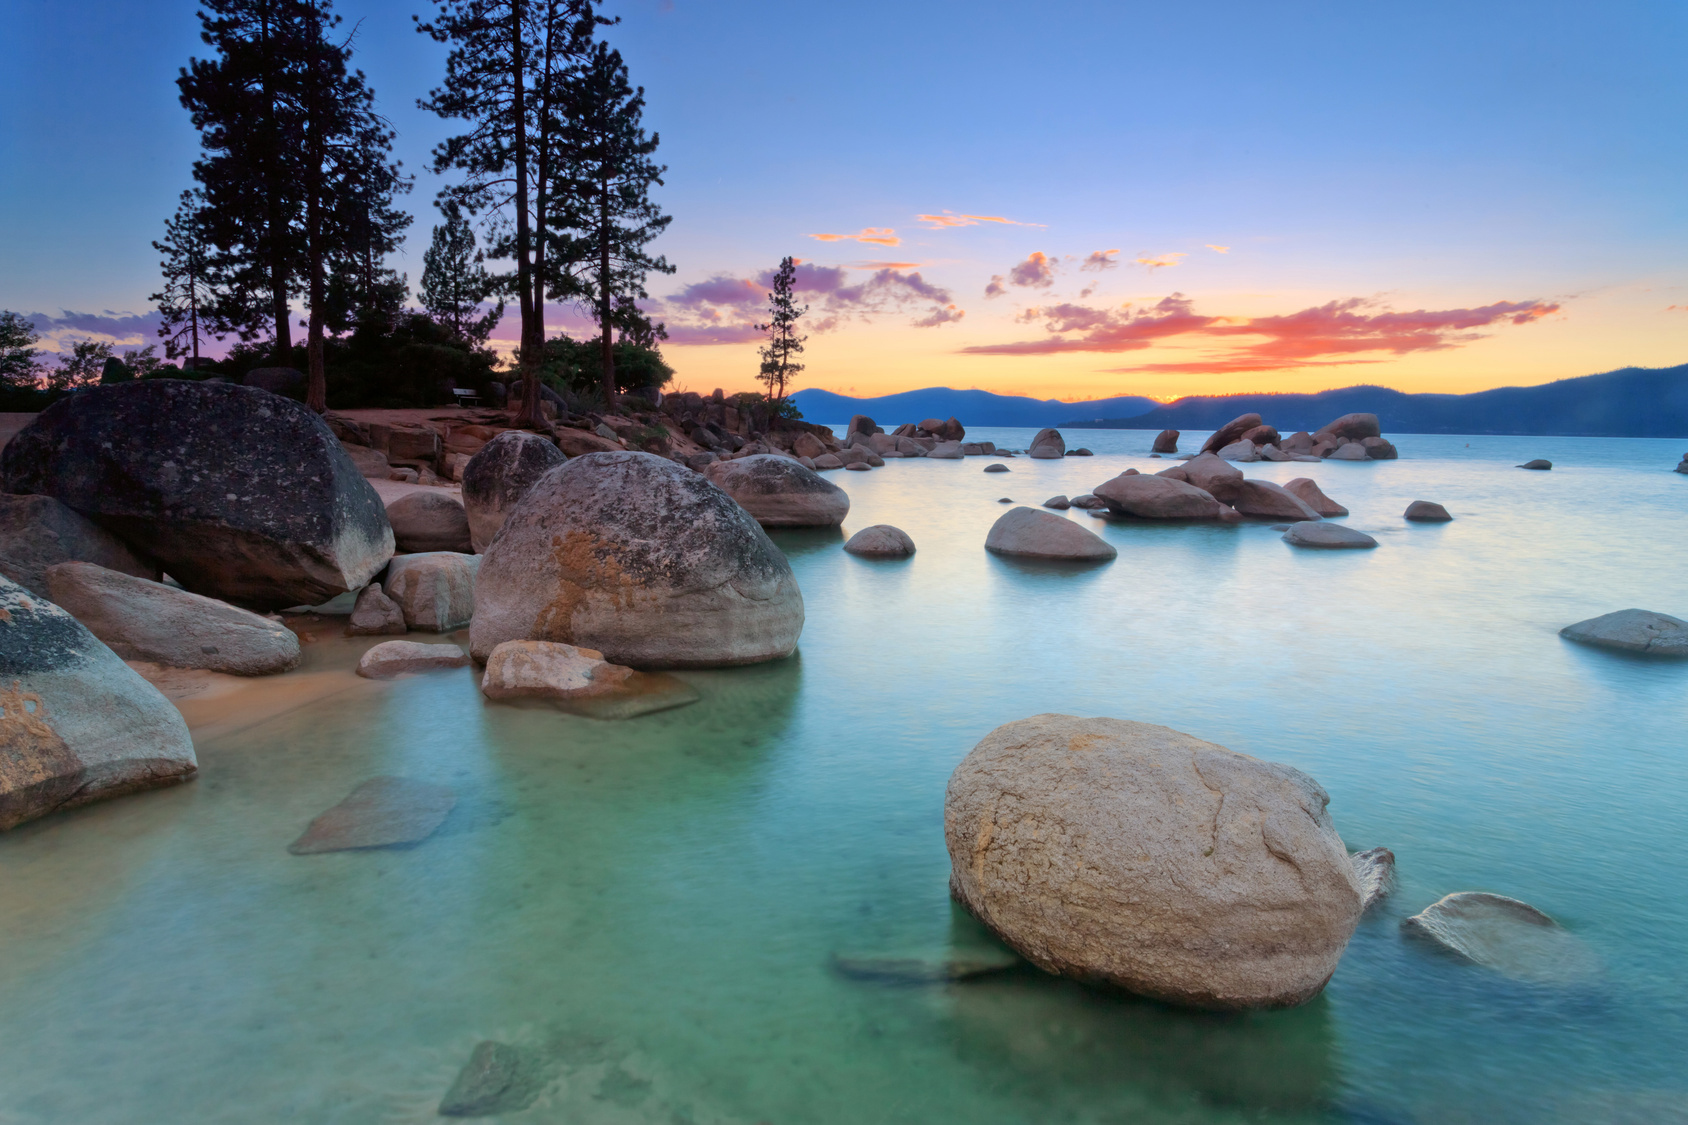 WordenGroup PR will spearhead the launch of new luxury hotel The Landing Resort & Spa, on the shores of Lake Tahoe (photo: © Mariusz Blach - Fotolia.com)